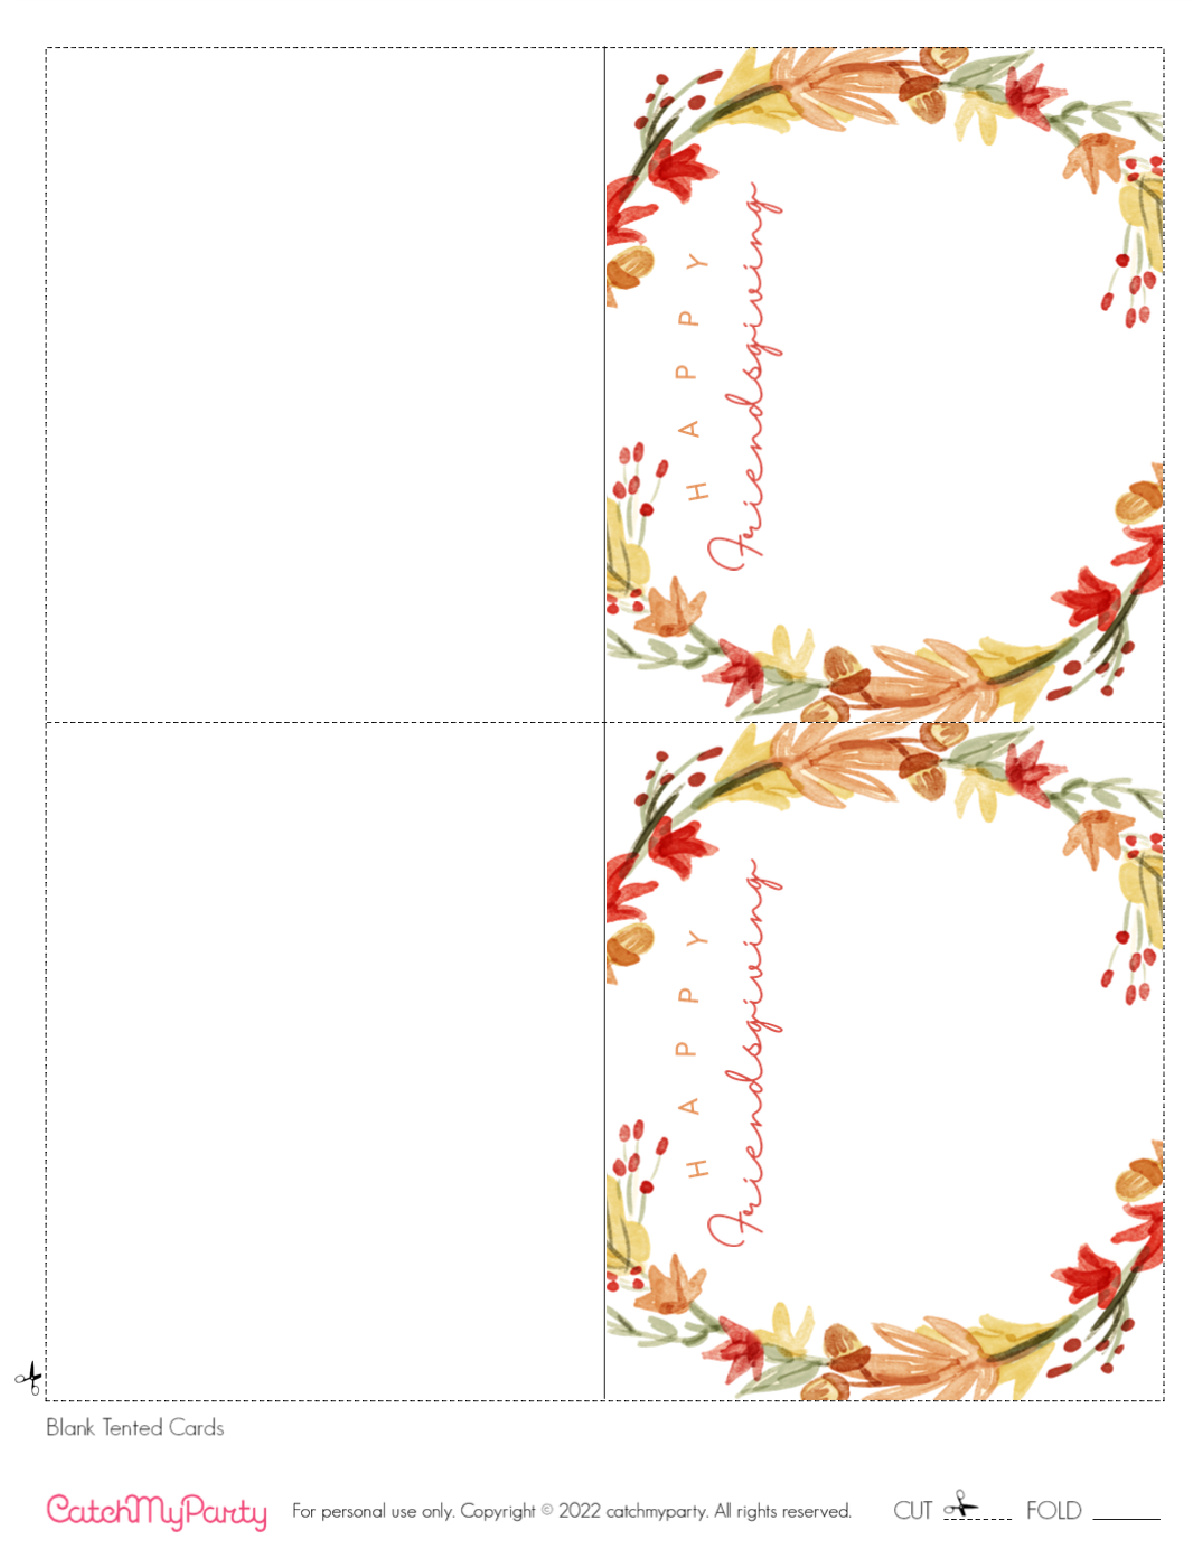 Download these FREE Friendsgiving Printables - Large Friendsgiving Blank Tented Cards